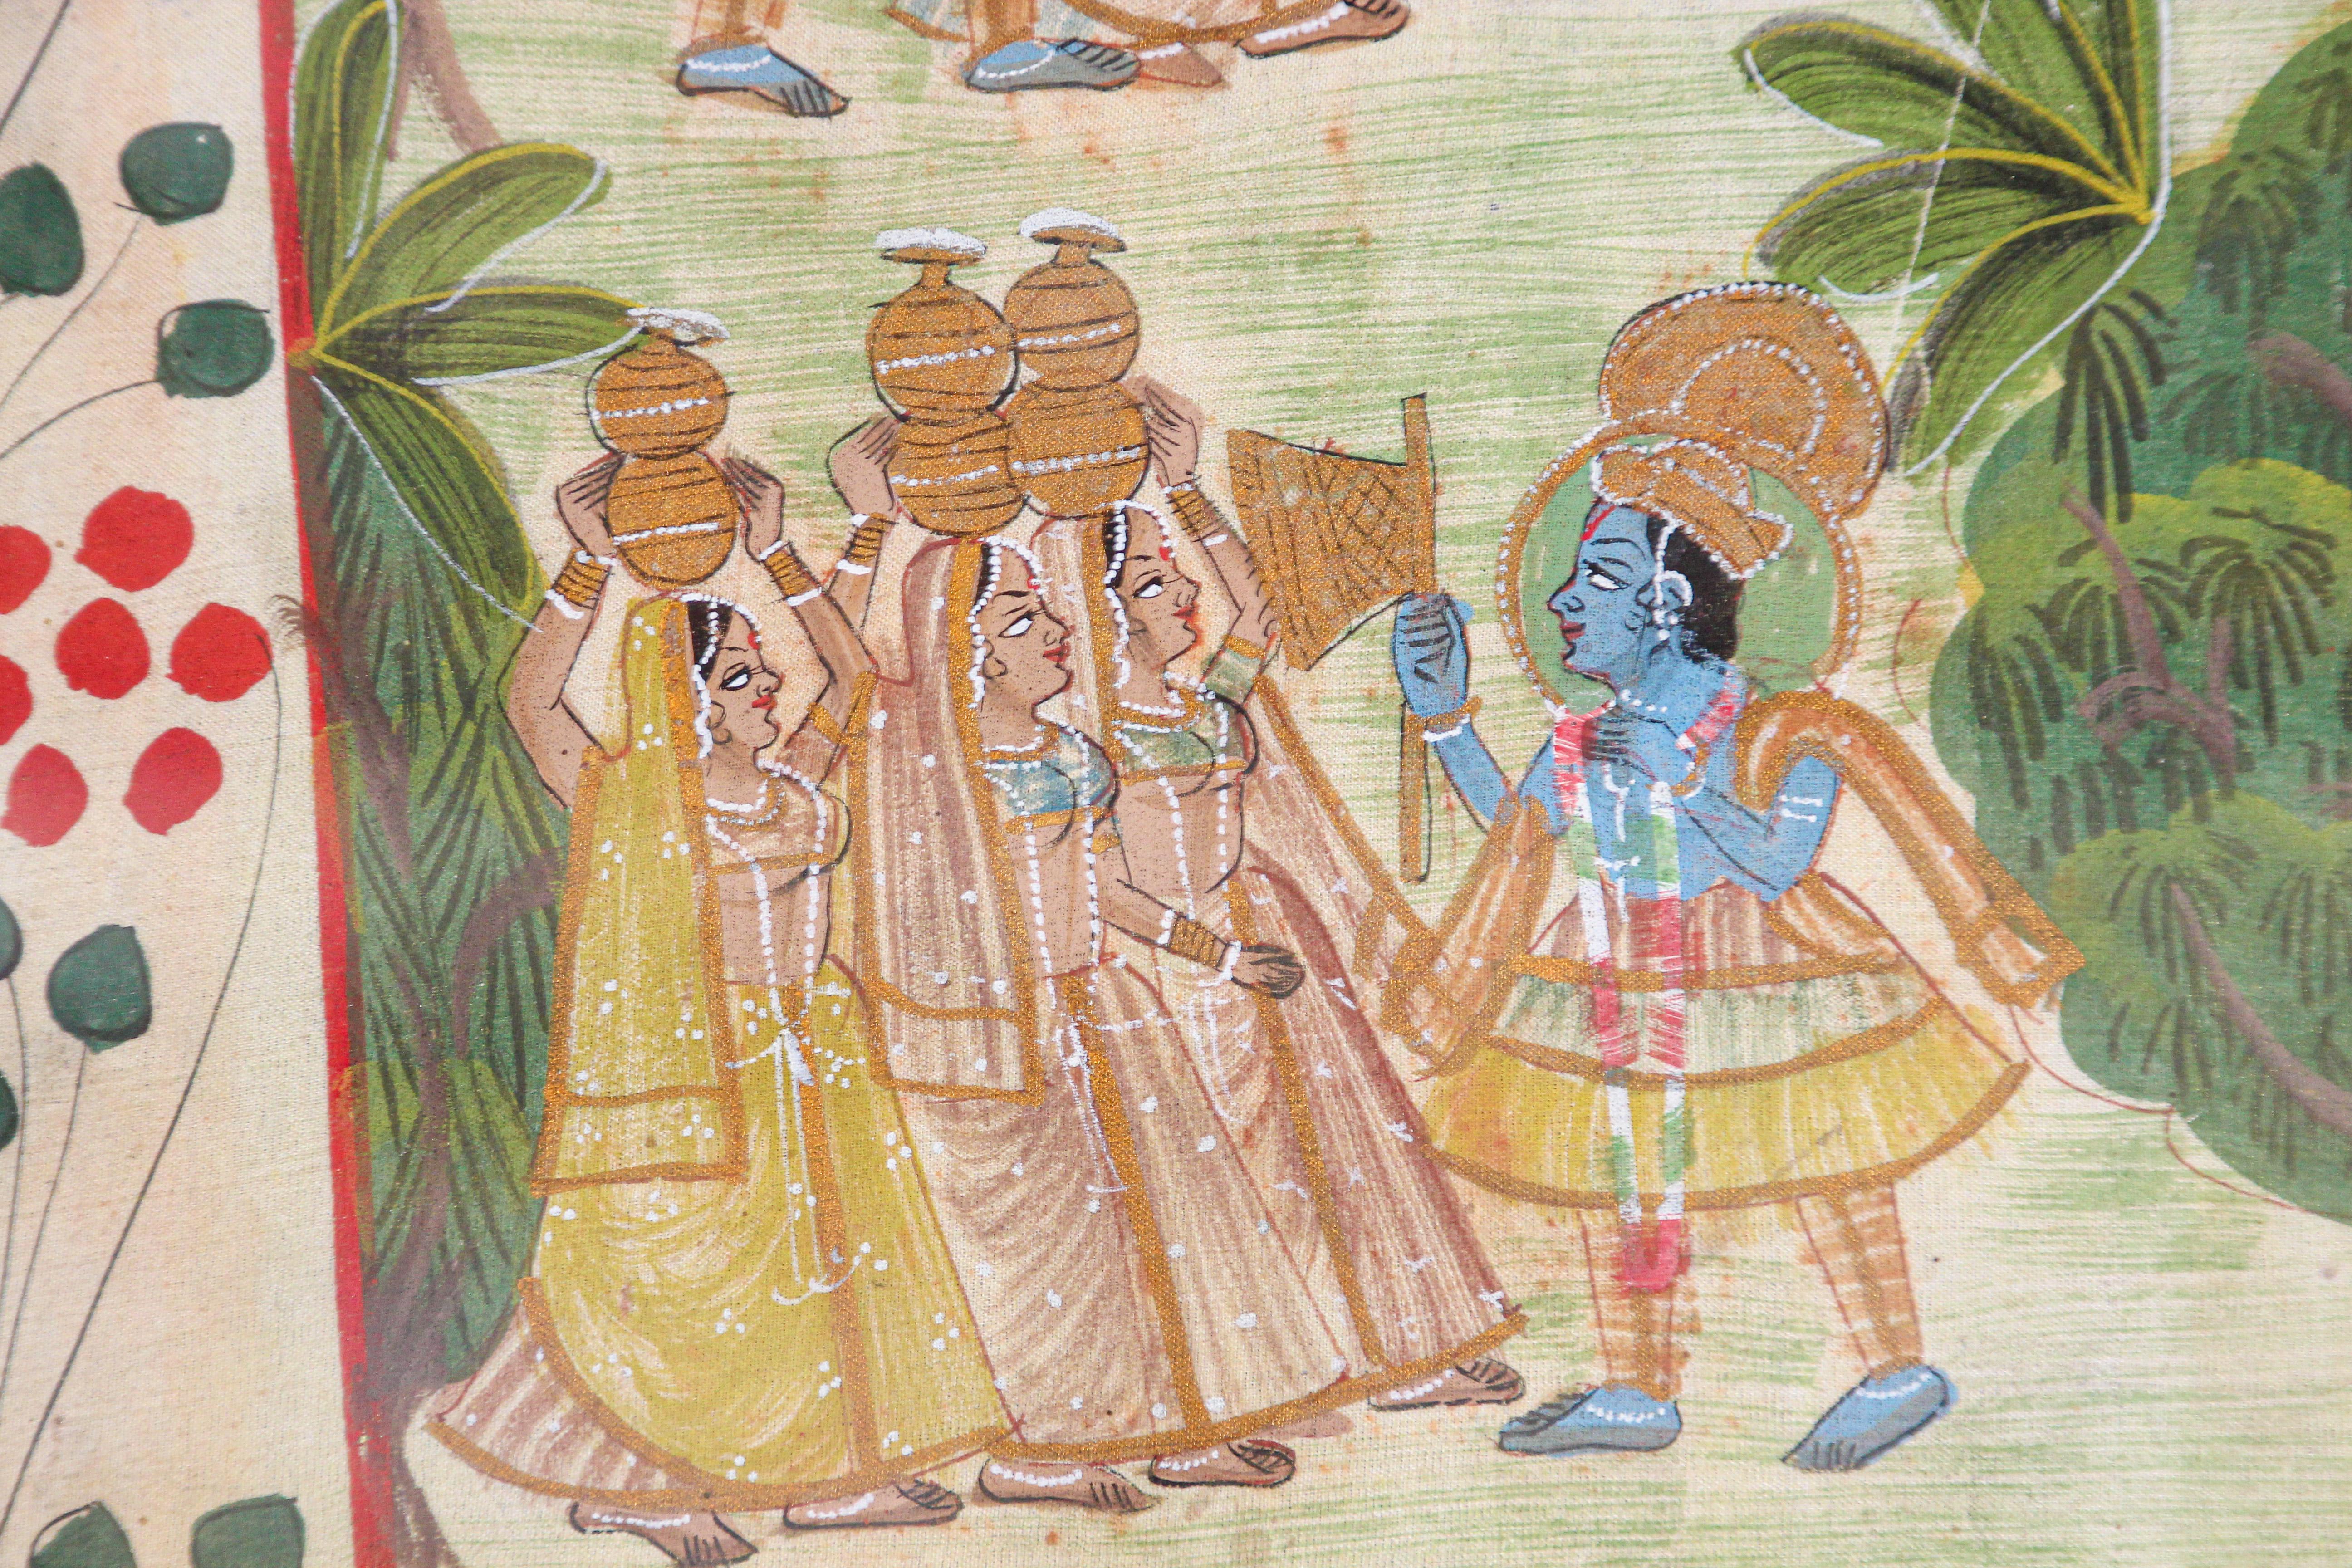 Krishna, Radha, and the Gopis Meet a Young Prince, Picchawai Painting 1